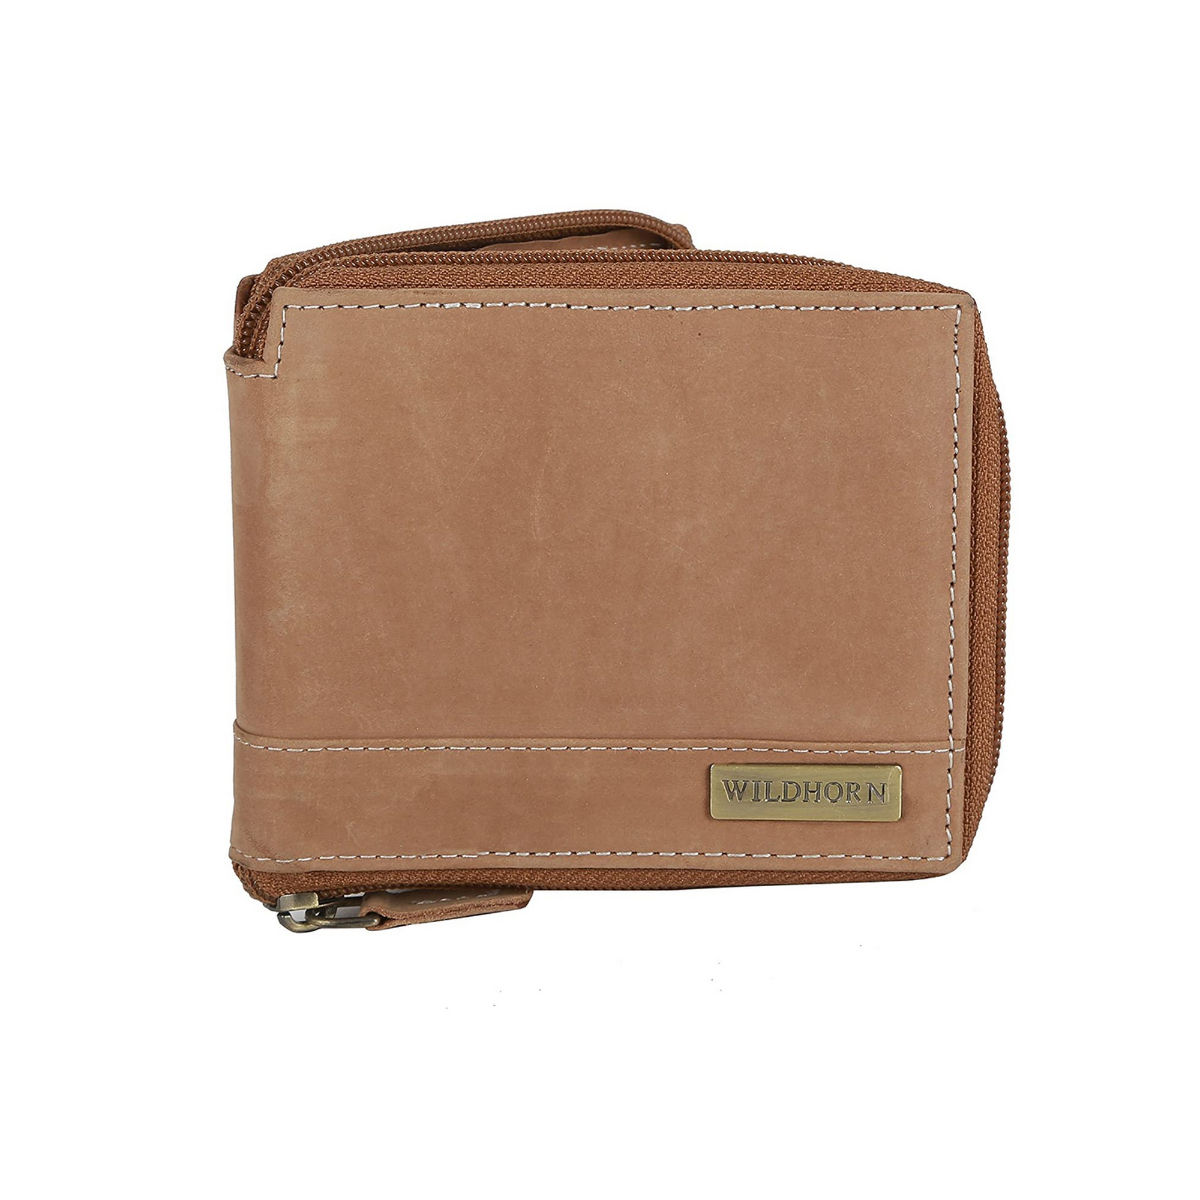 Da Milano Genuine Leather Tan Mens Wallet (Tan) At Nykaa, Best Beauty Products Online